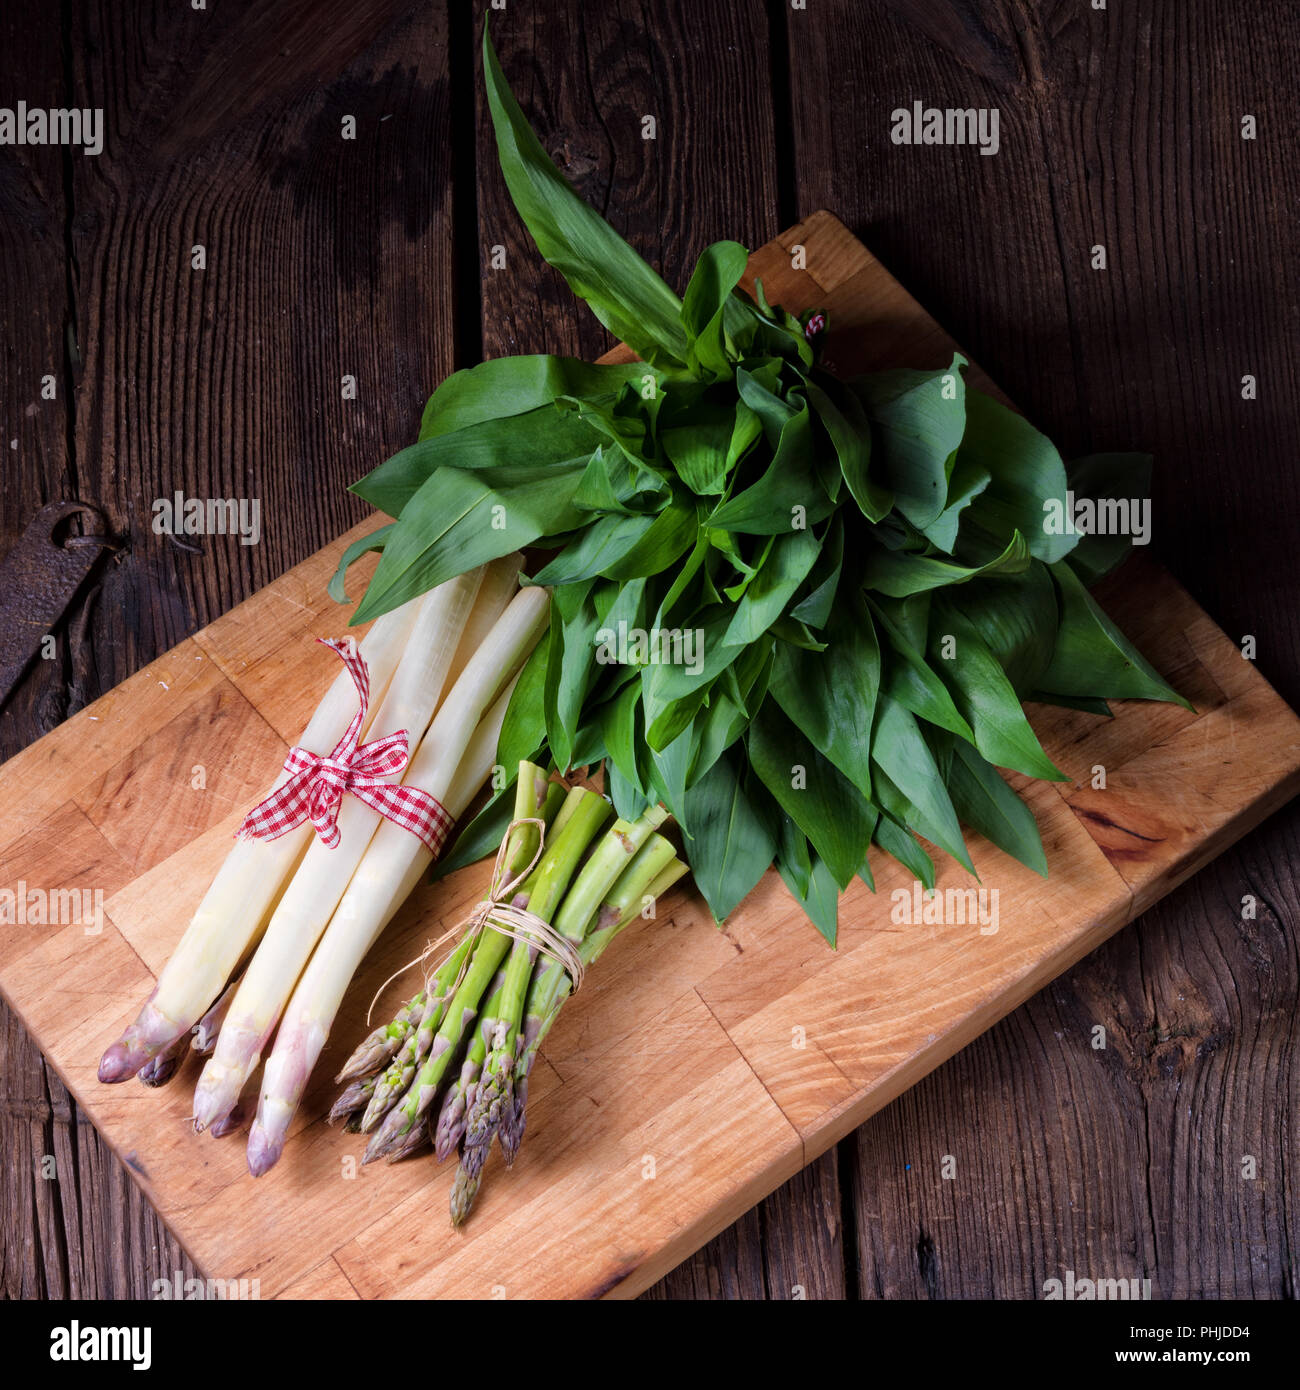 Bear's garlic with white and green asparagus Stock Photo